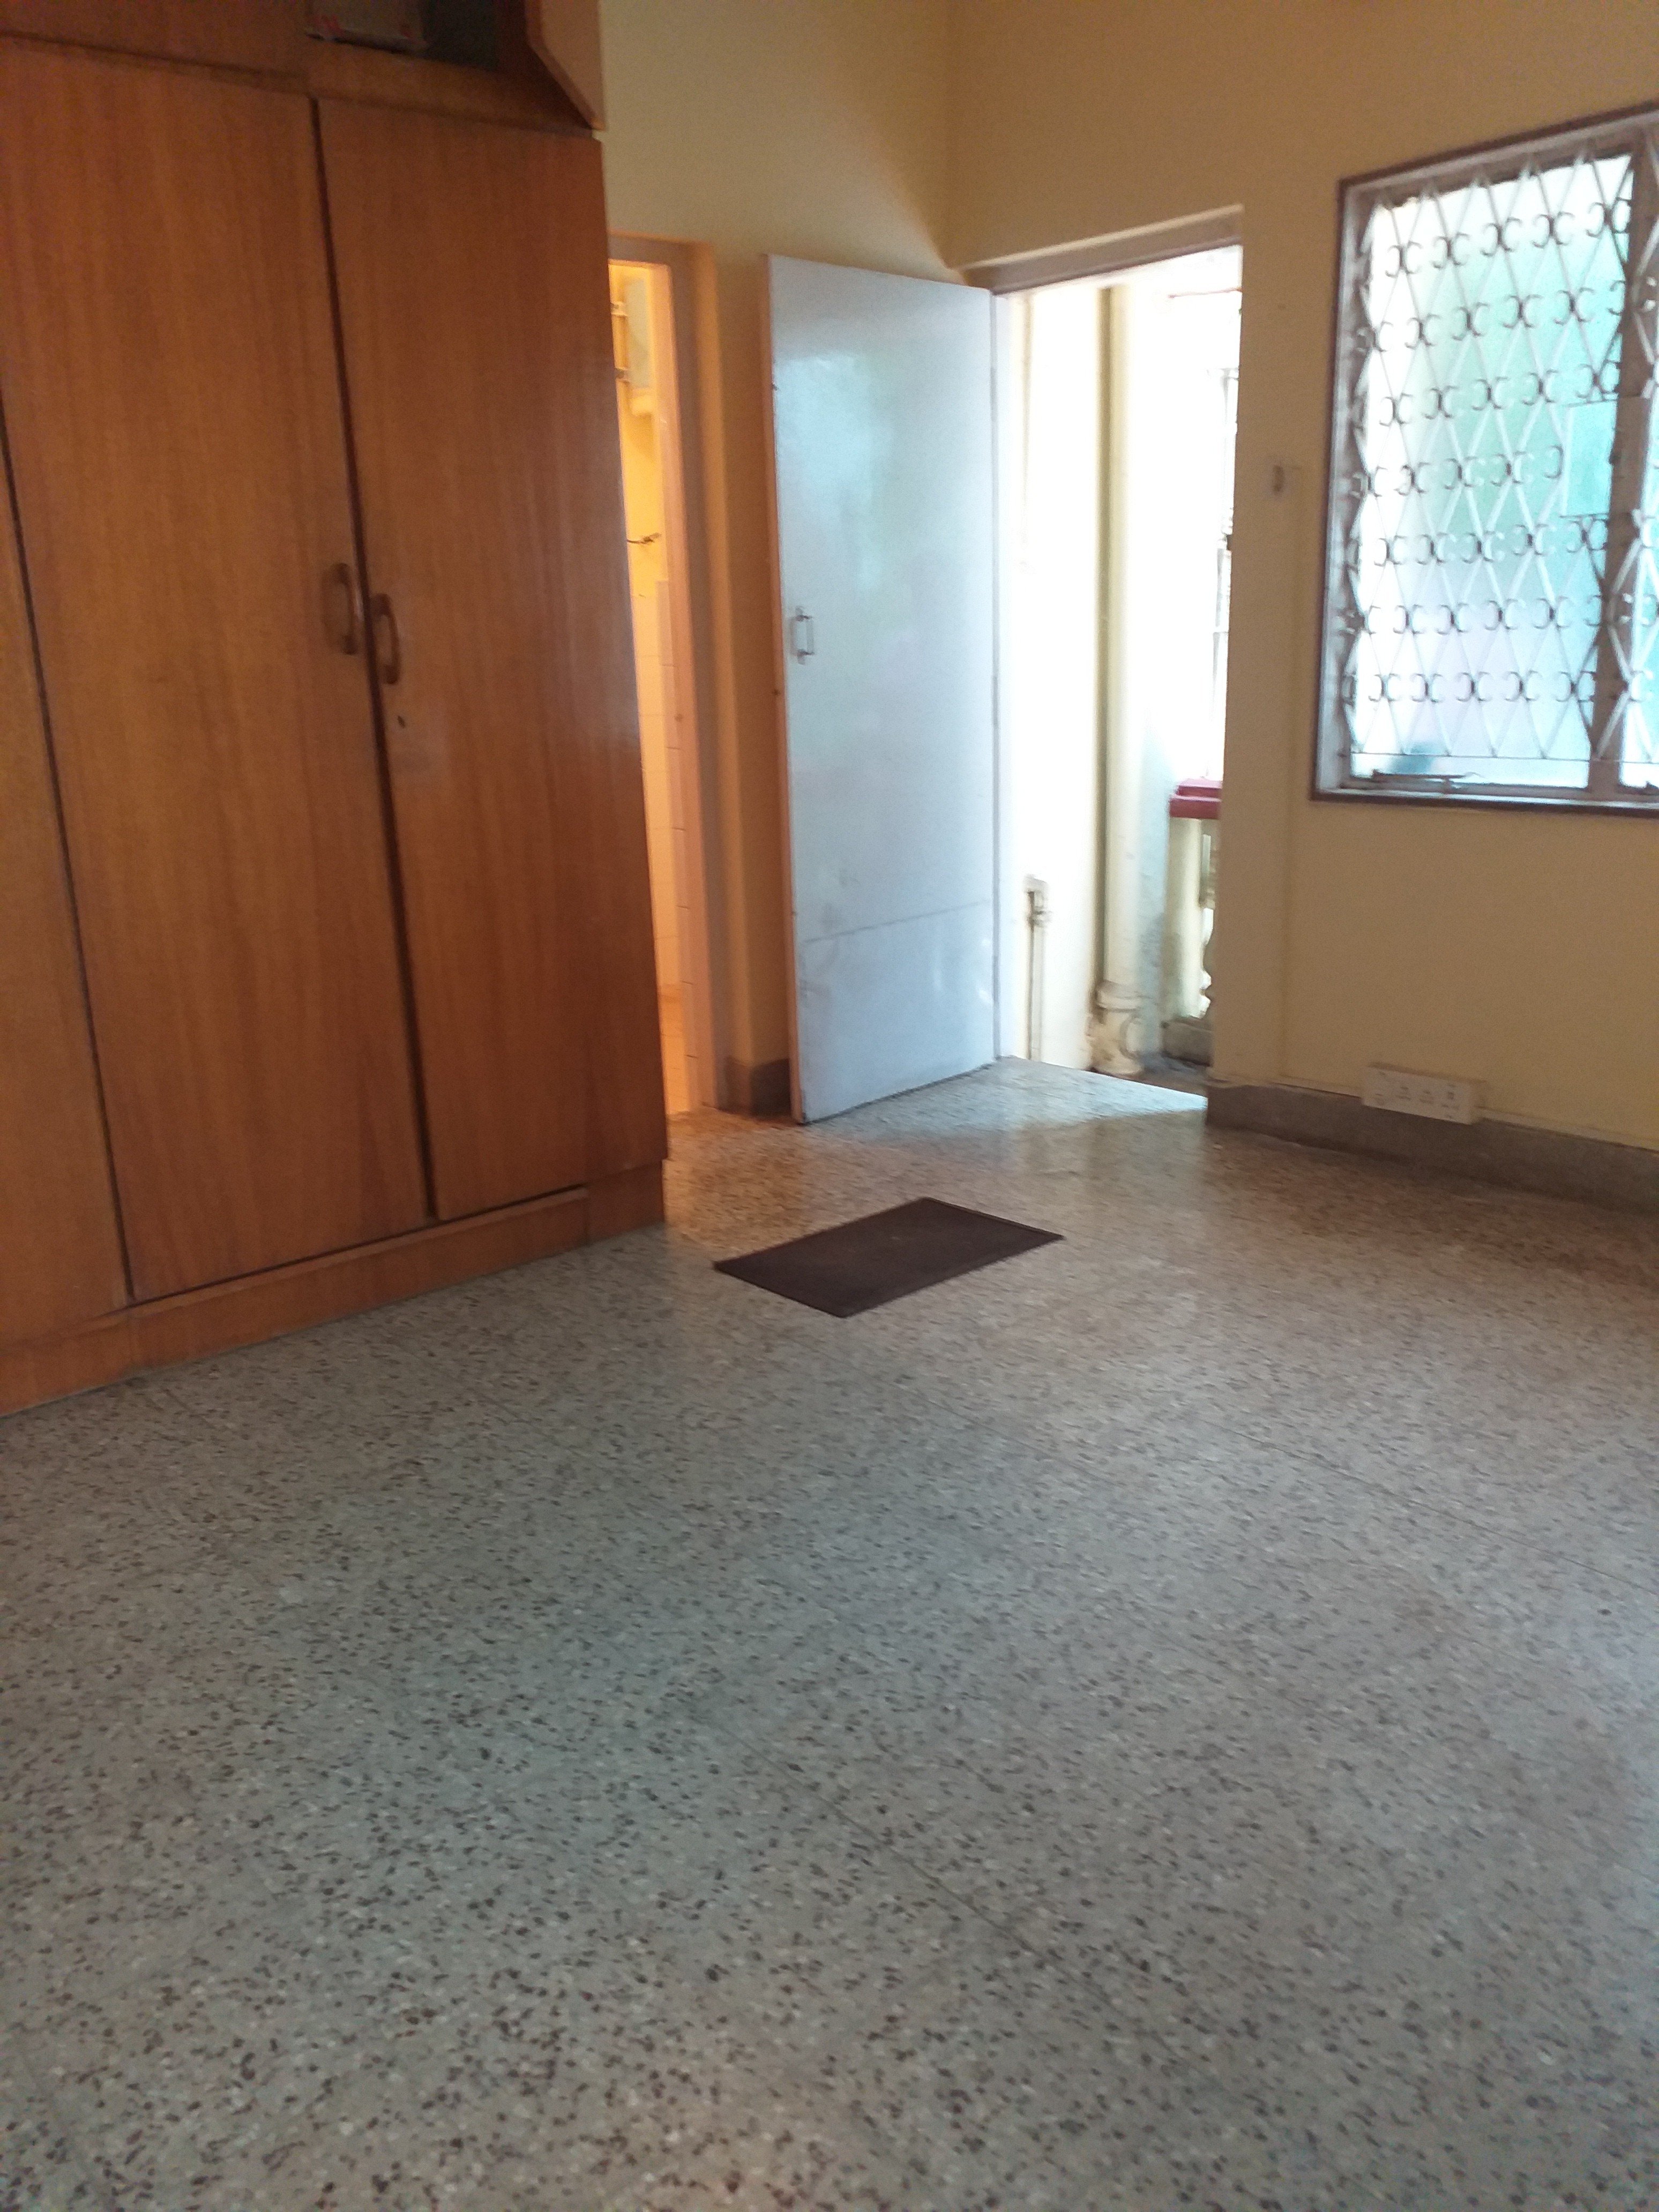 Ulsoor Road Exclusive 4 bedroom independent house for office use